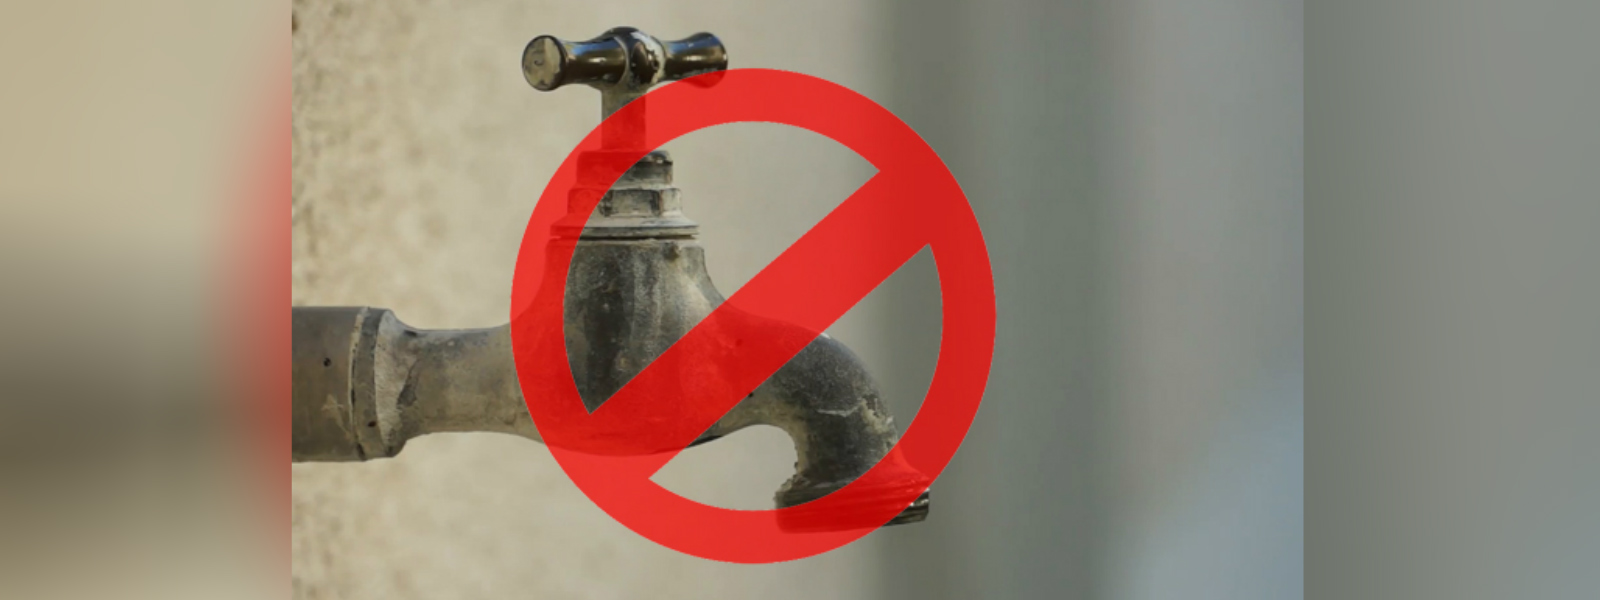 15 hour water cut in effect today for Colombo